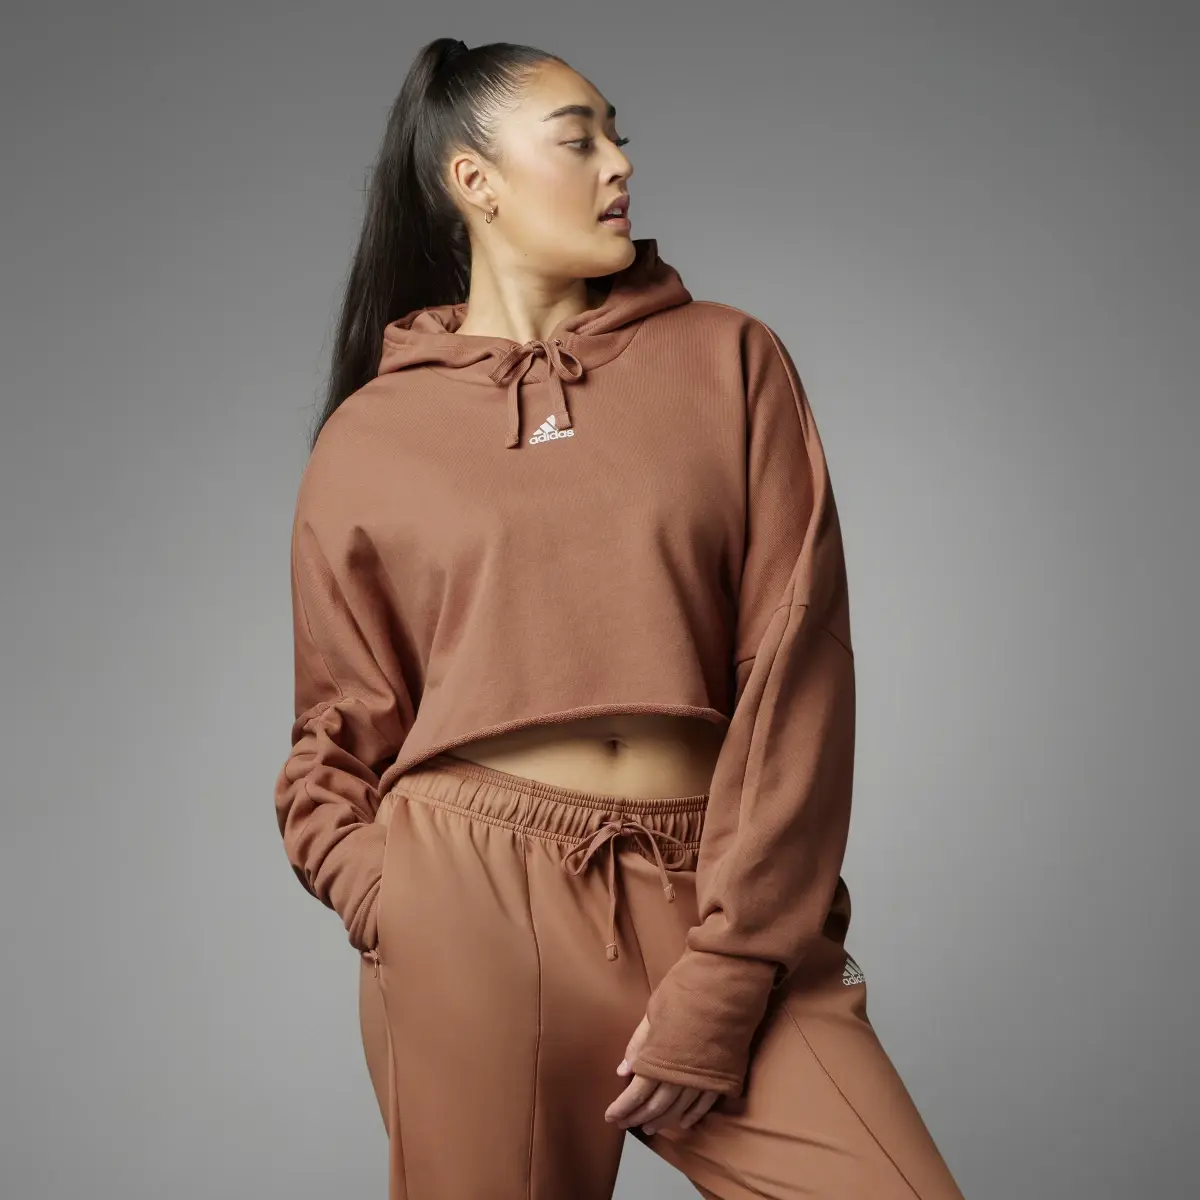 Adidas Collective Power Cropped Hoodie (Plus Size). 3